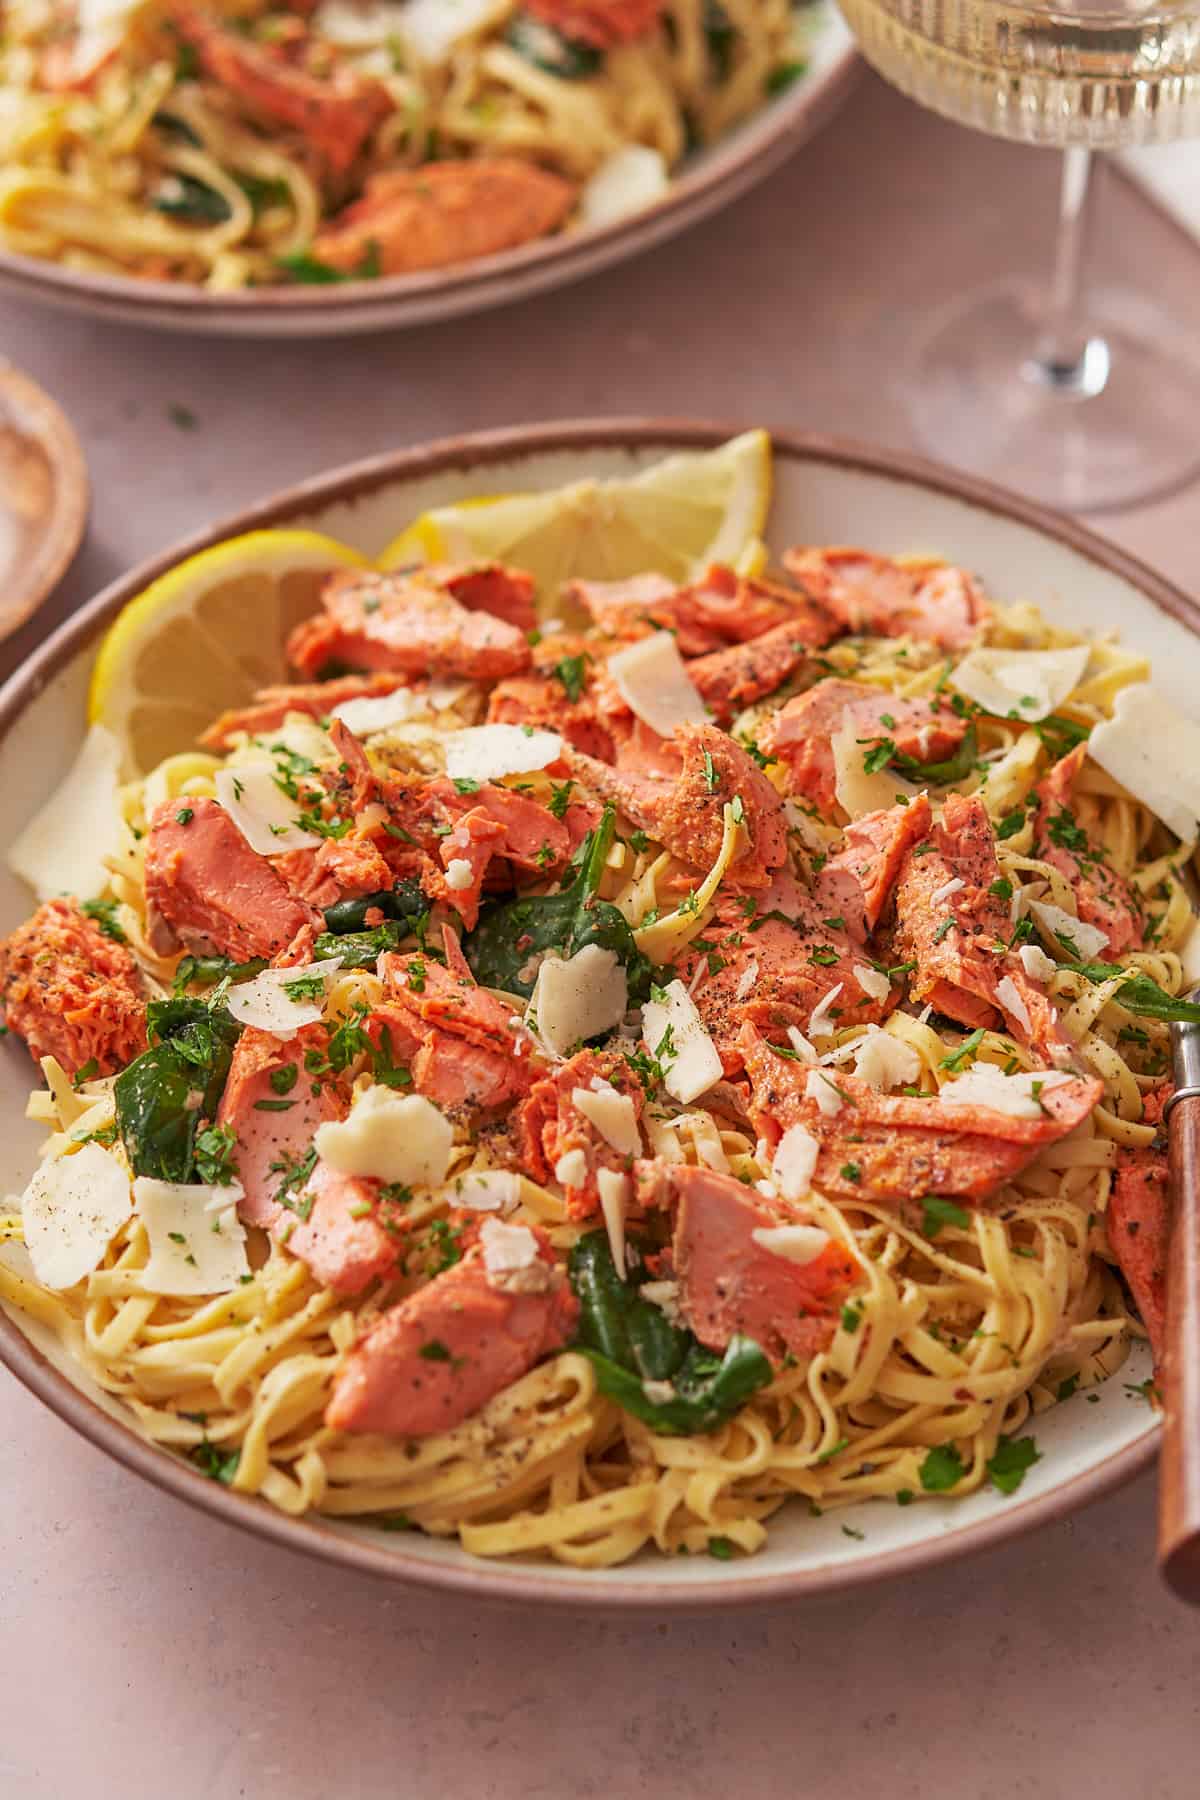 large bowl of creamy salmon pasta with large bites of salmon, spinach, and lemons.